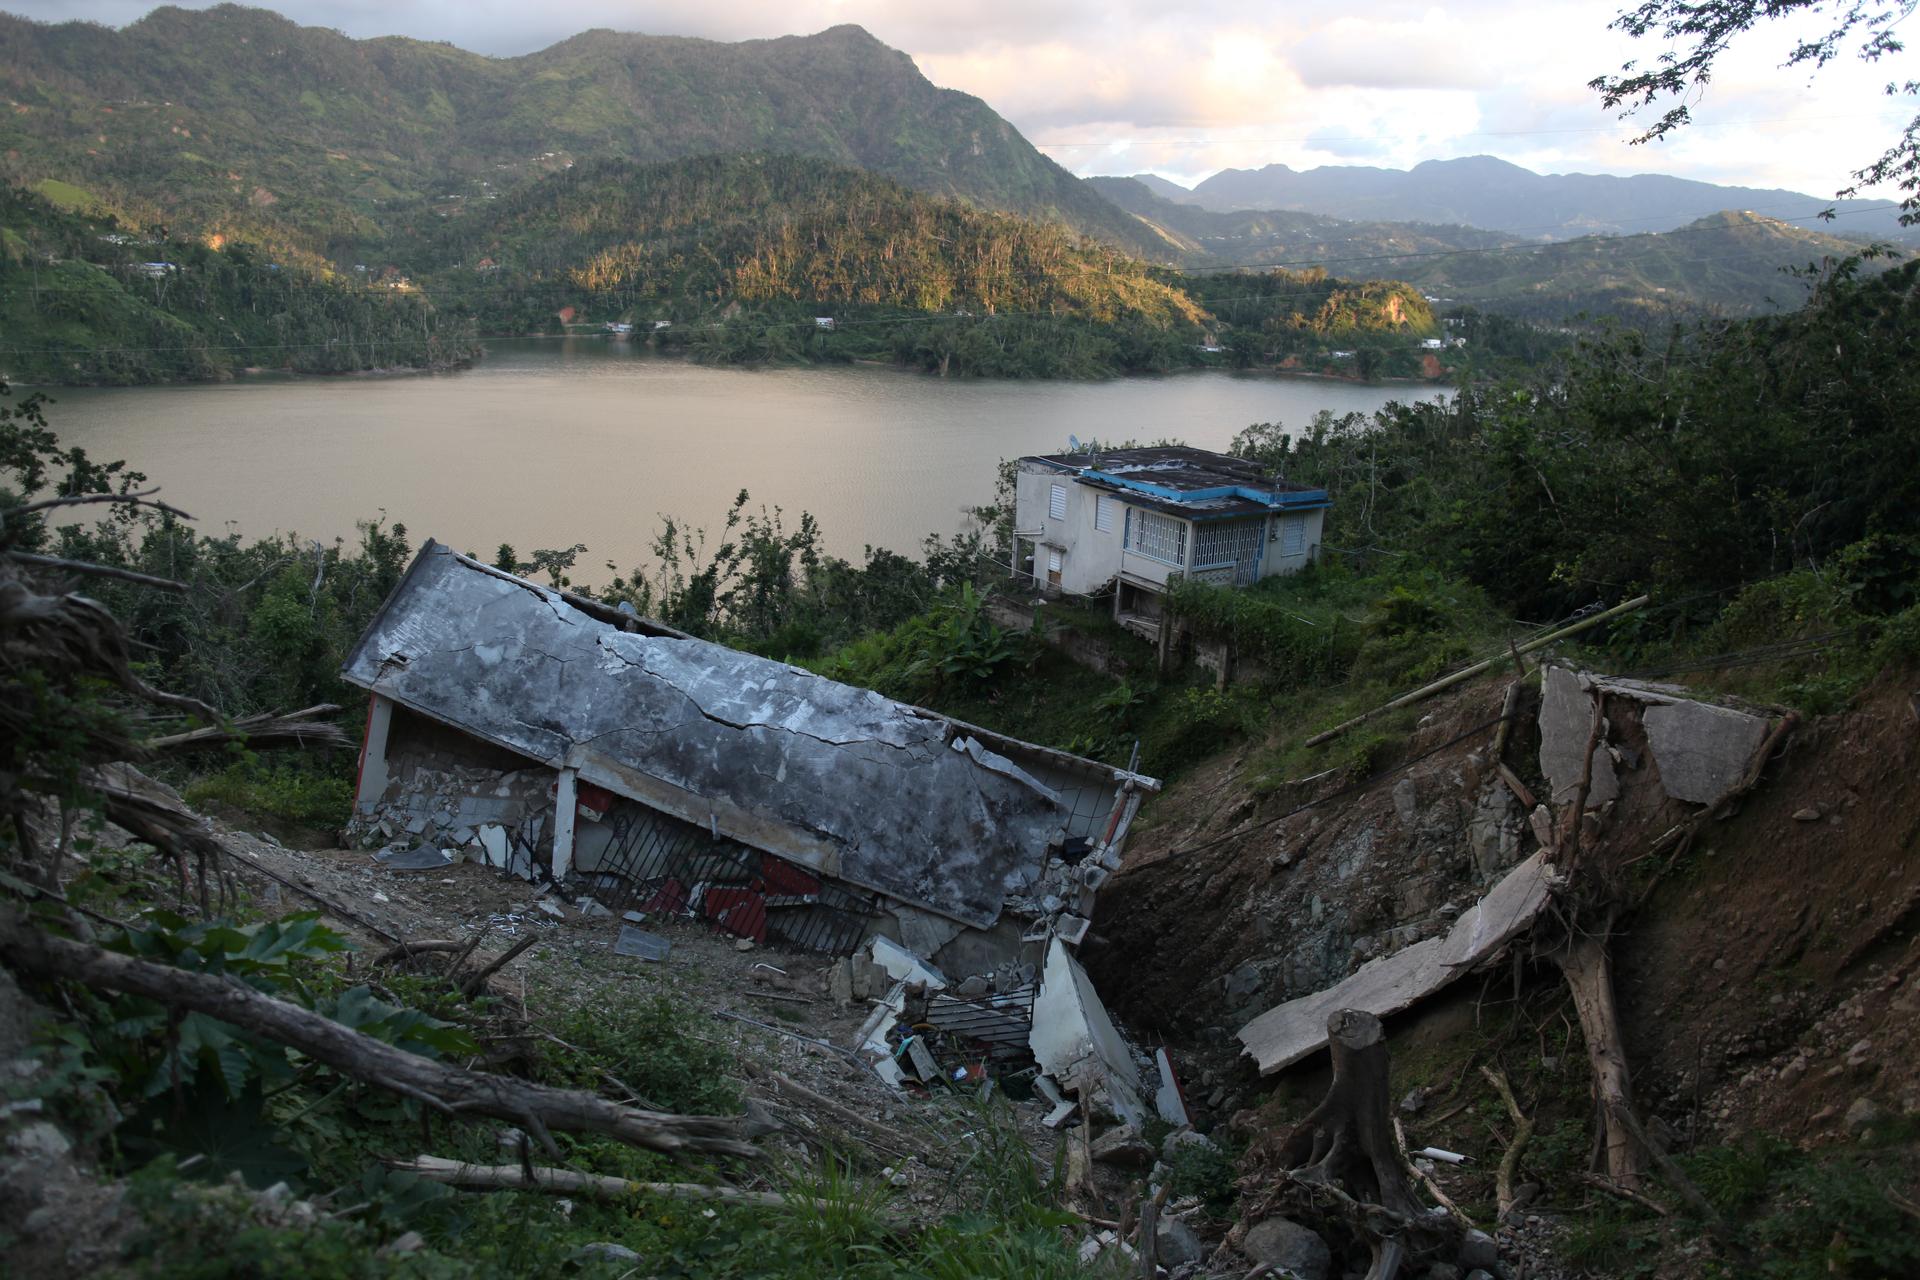 collapsed house in ravine with lake and mountains in background